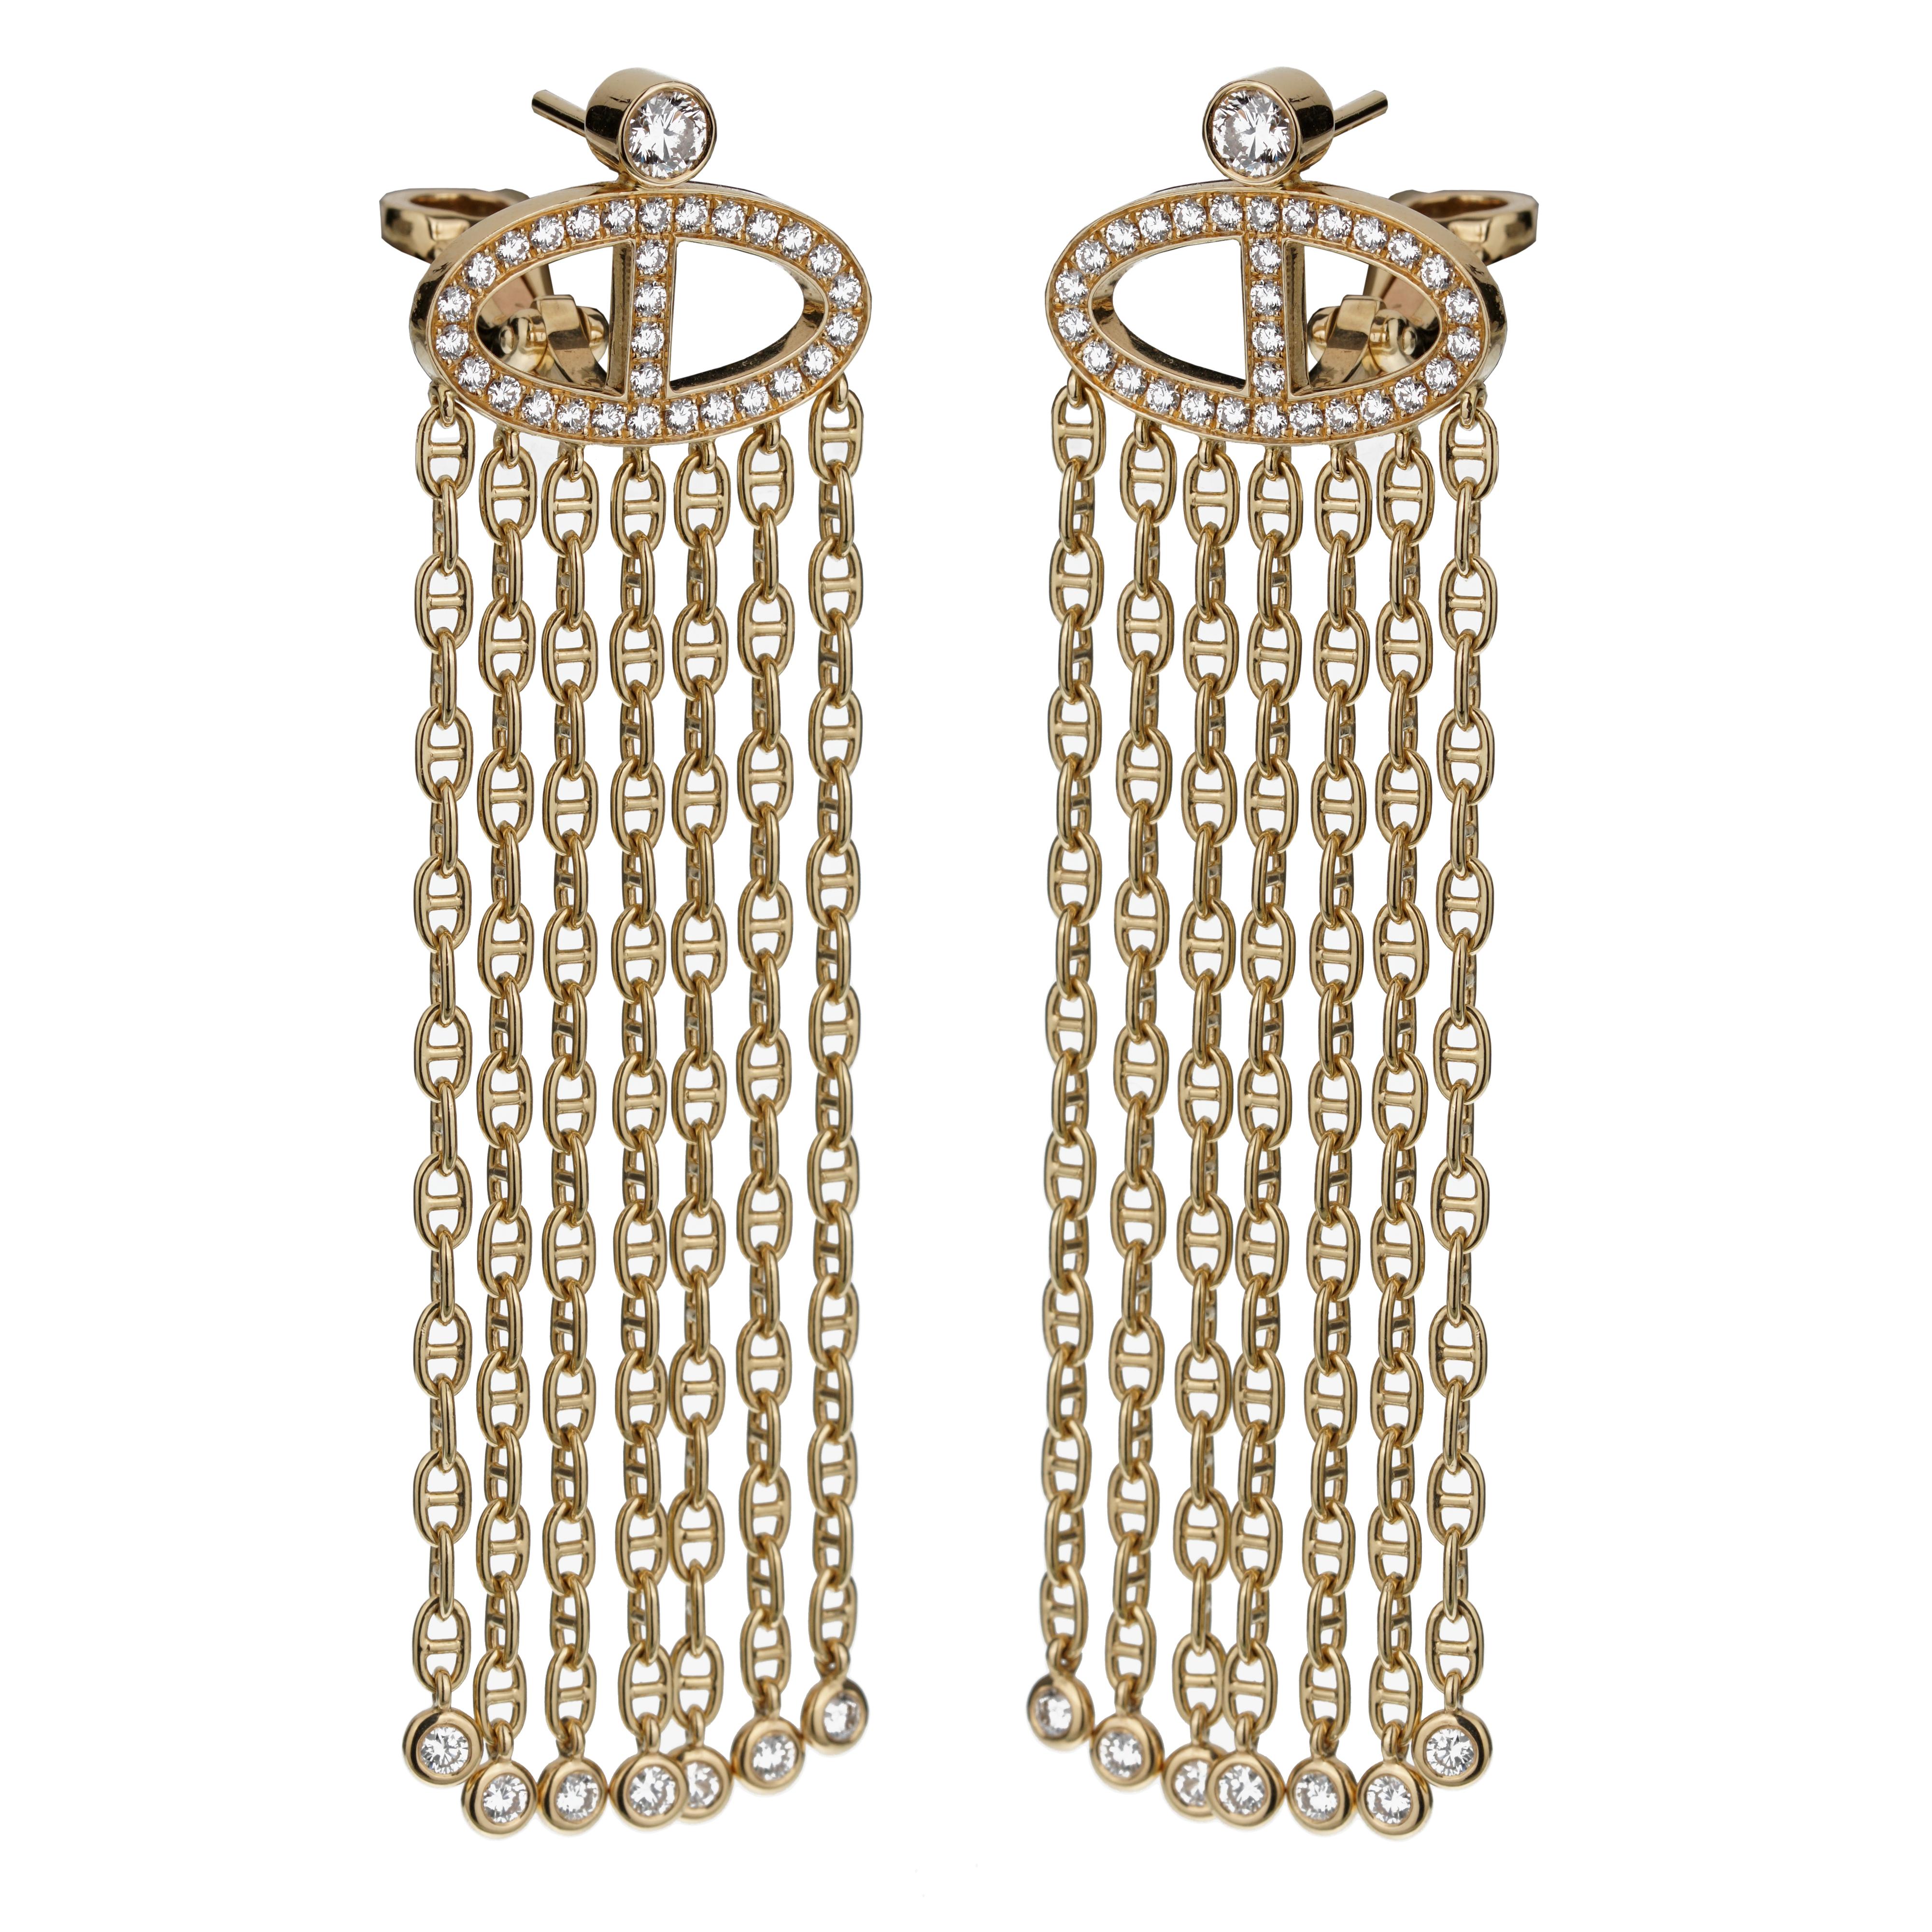 Elegance redefined, the Hermès Diamond Limited Edition Chaine d'Ancre Yellow Gold Drop Earrings are a masterful blend of luxury, craftsmanship, and timeless design, emblematic of the unparalleled Hermès legacy.